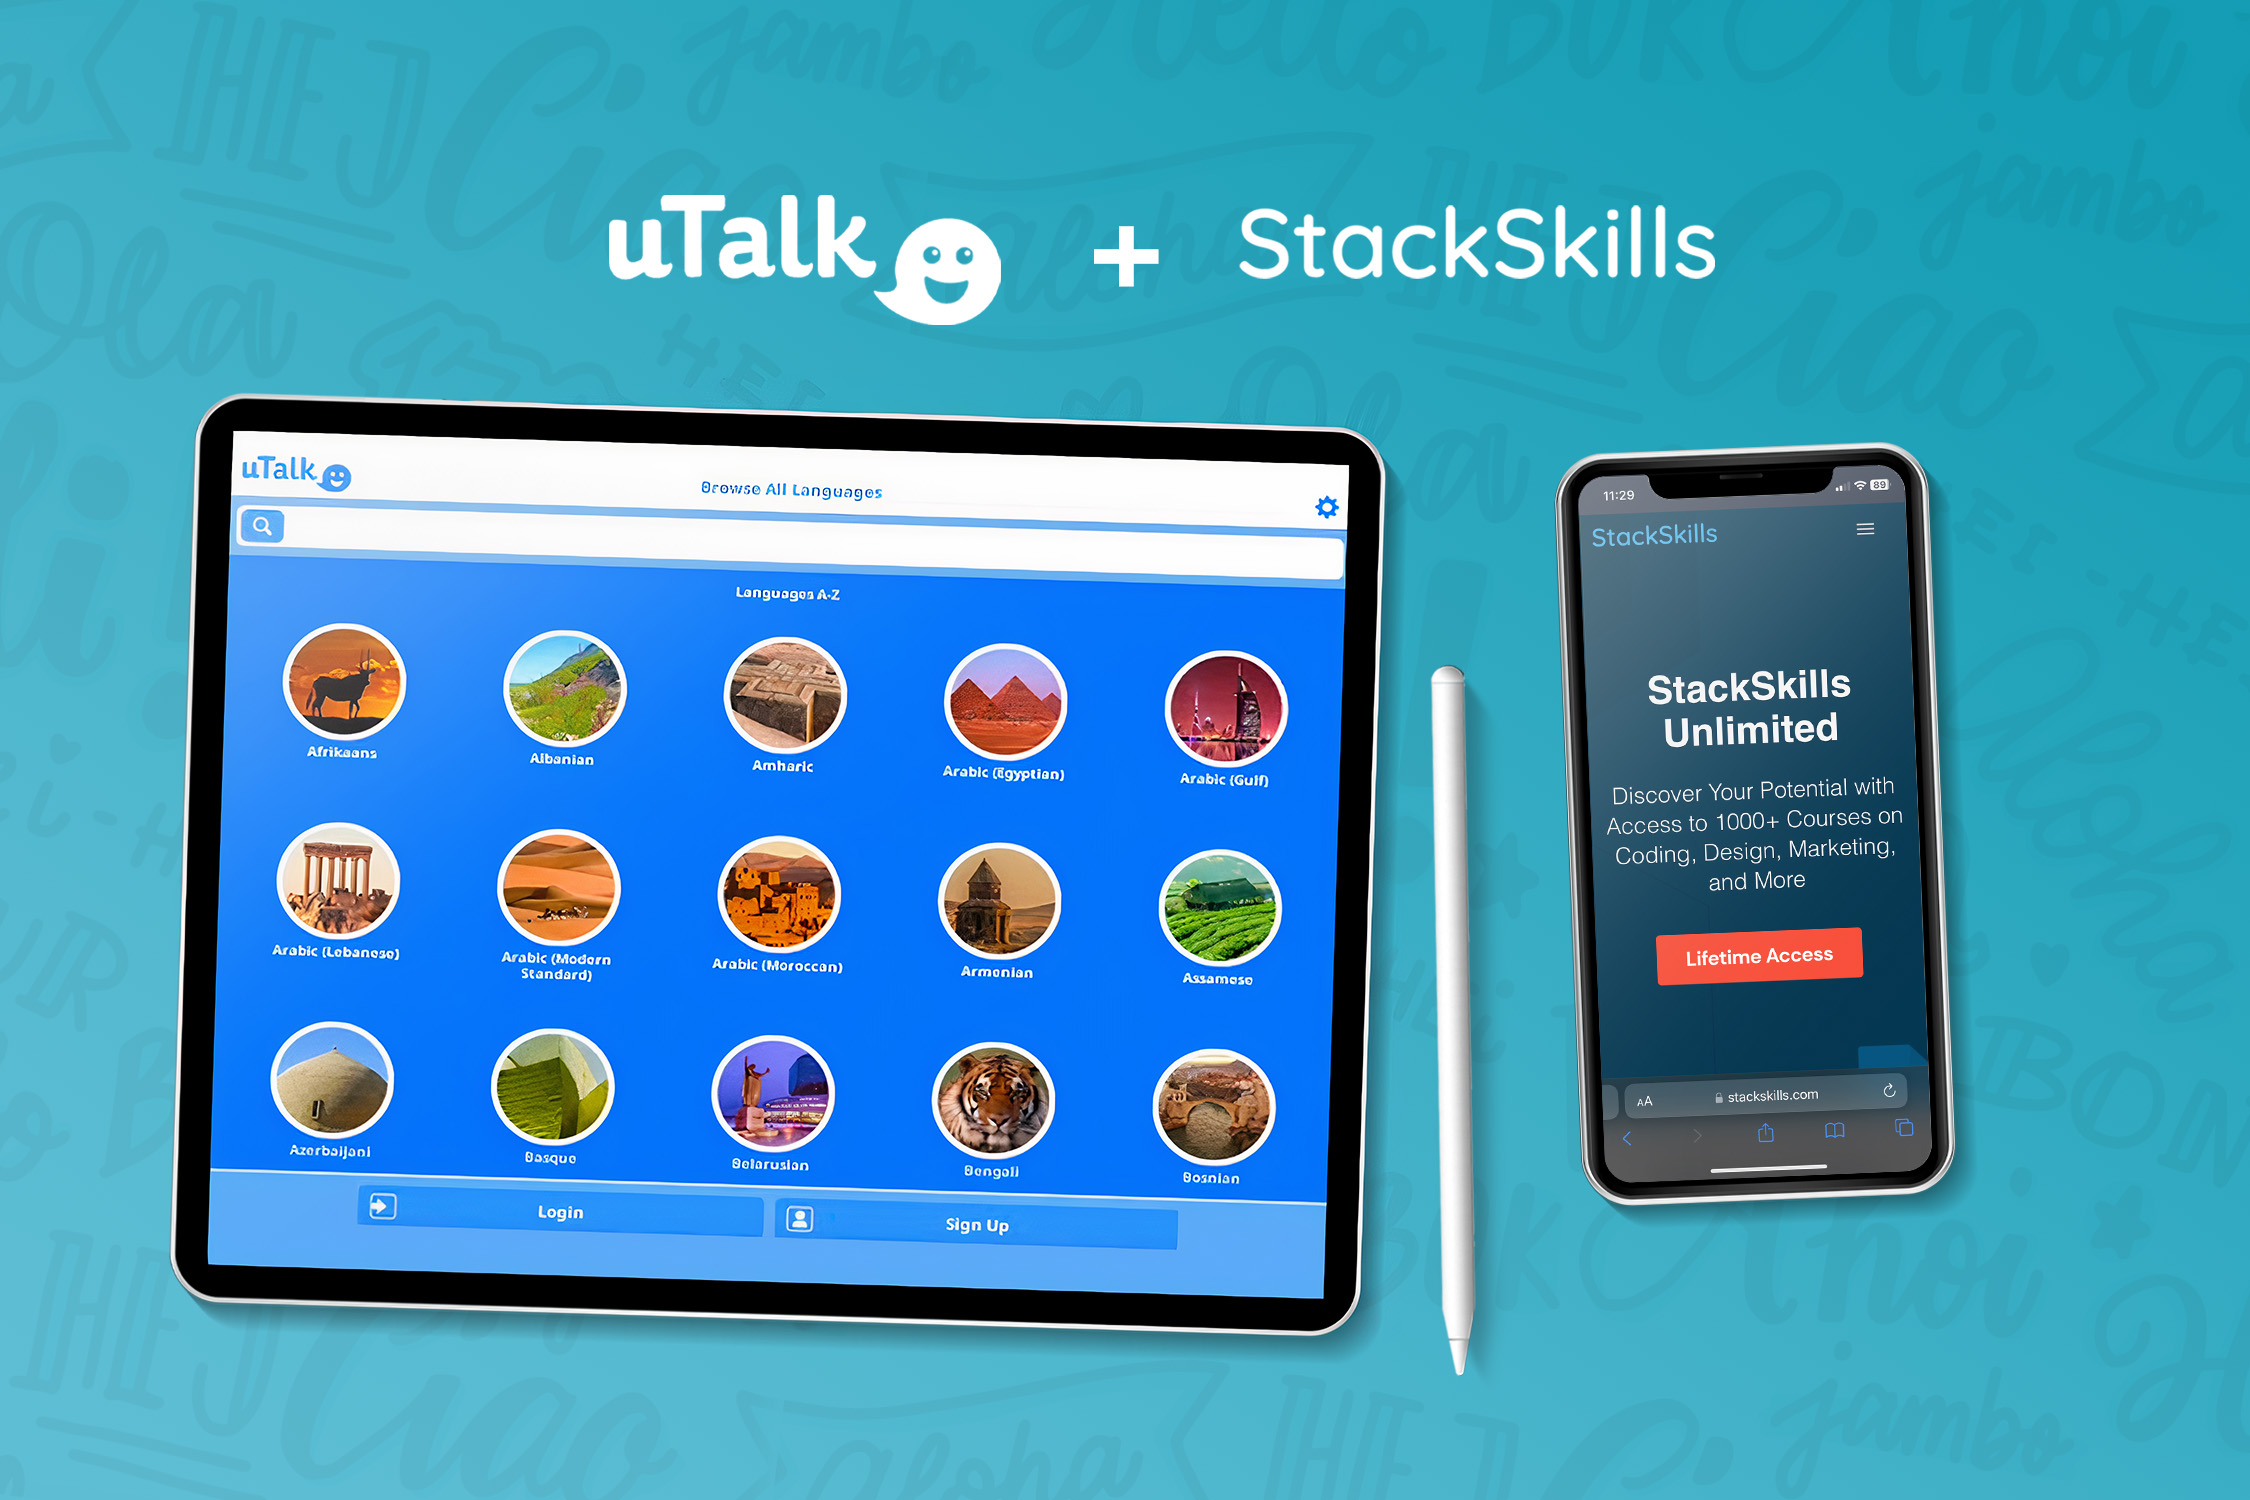 An advertisement for uTalk and StackSkills on a teal background